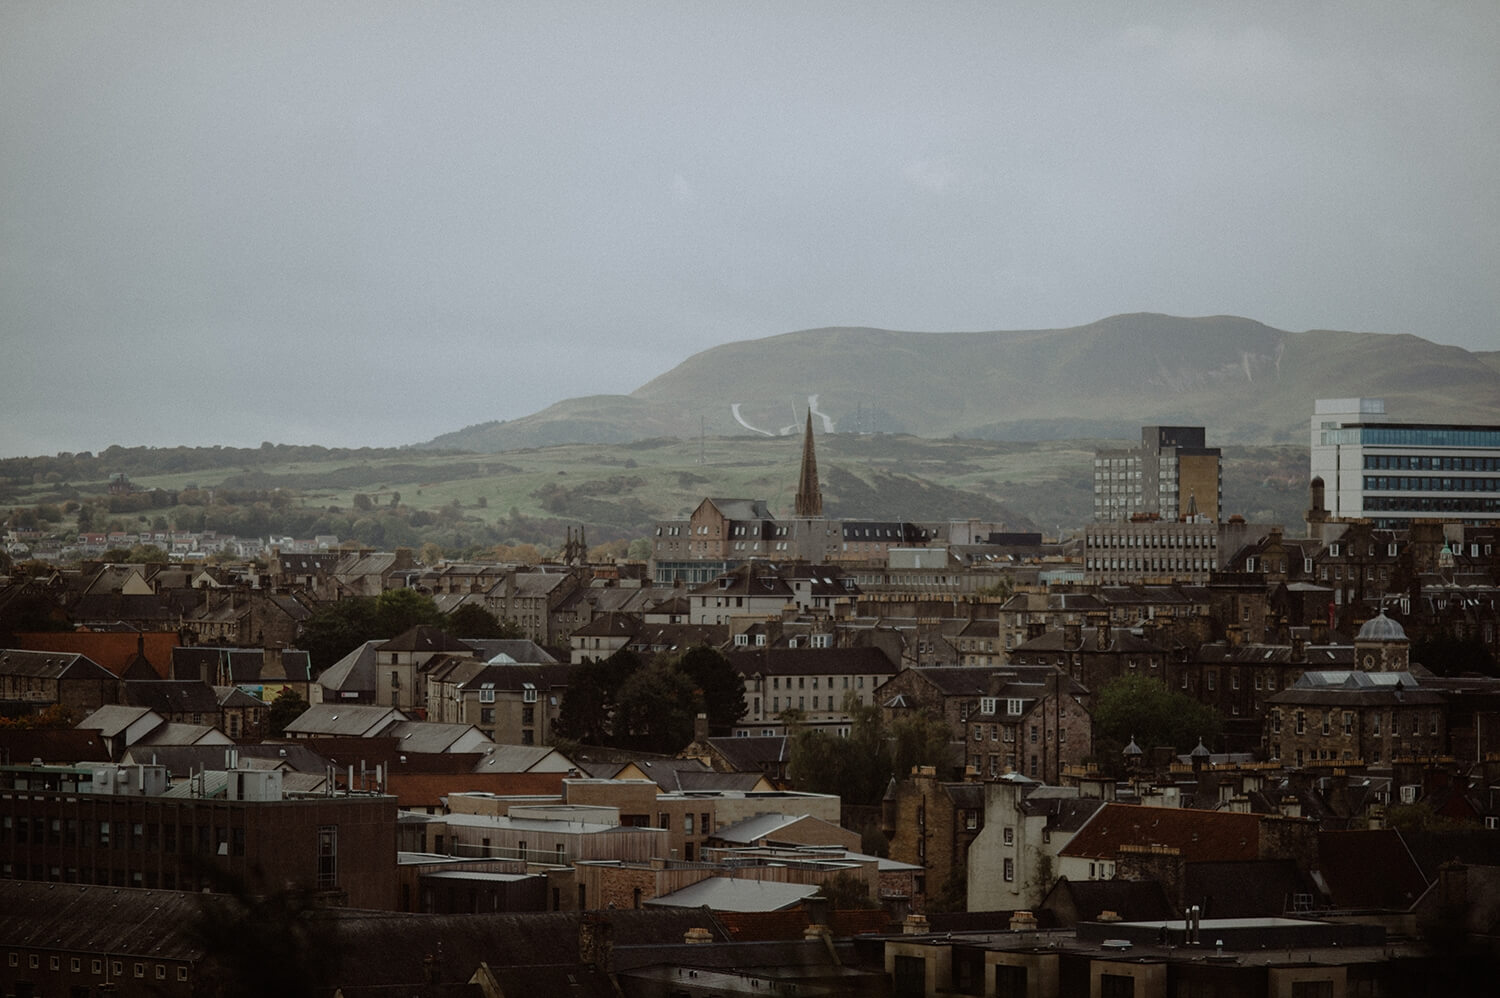 The view from Calton Hill.